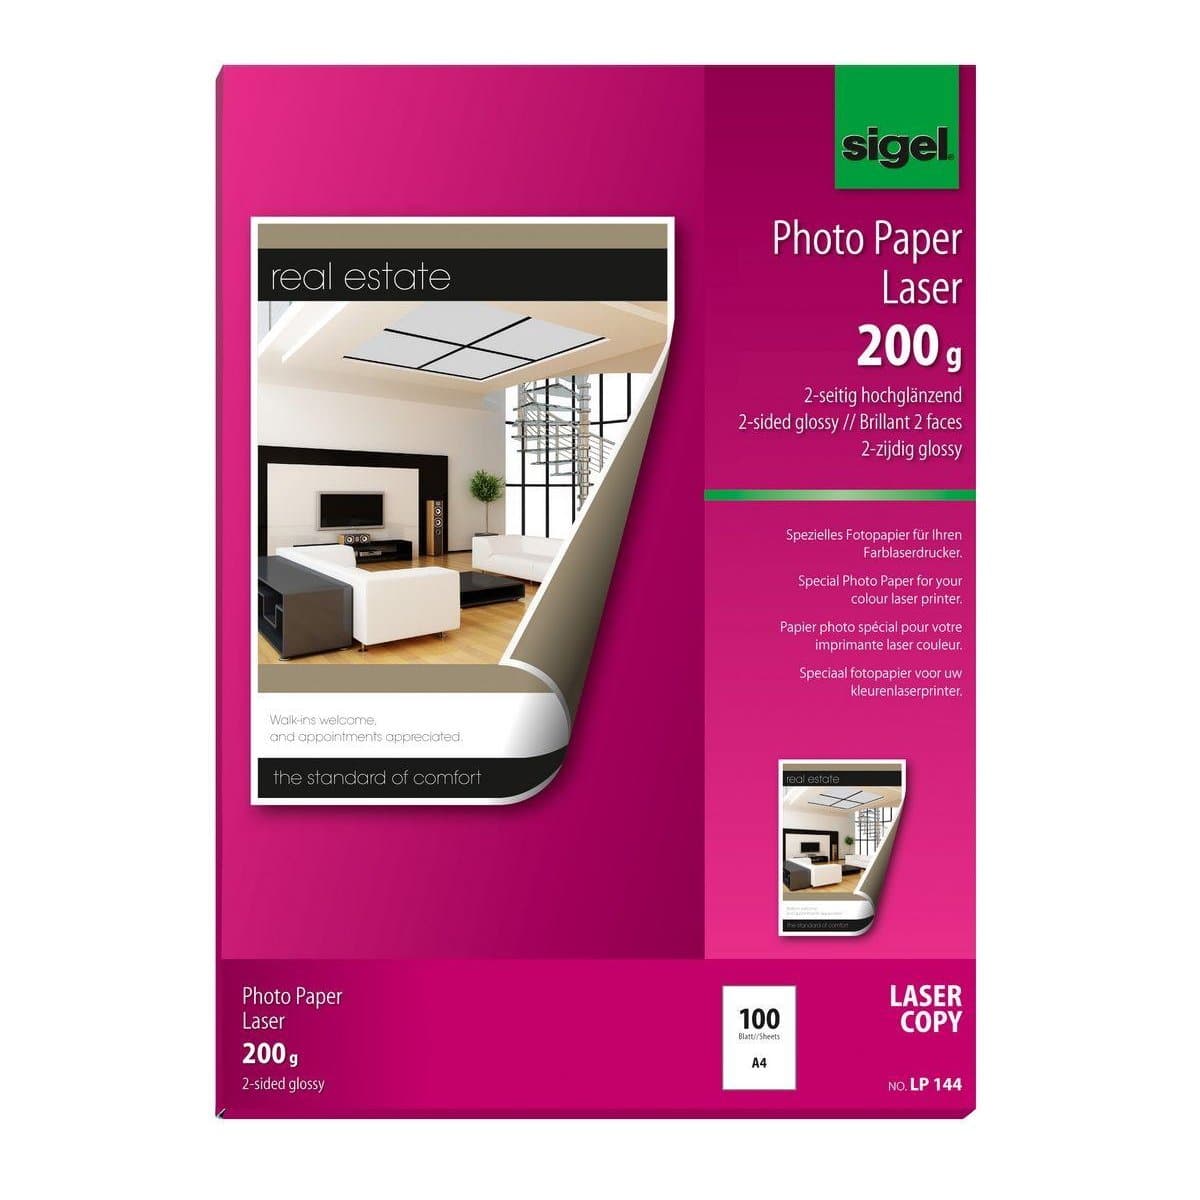 Sigel Photo Paper for Colour Laserprinter/Copier, 2-sided, A4, 200 gsm, 100 sheets, Glossy White